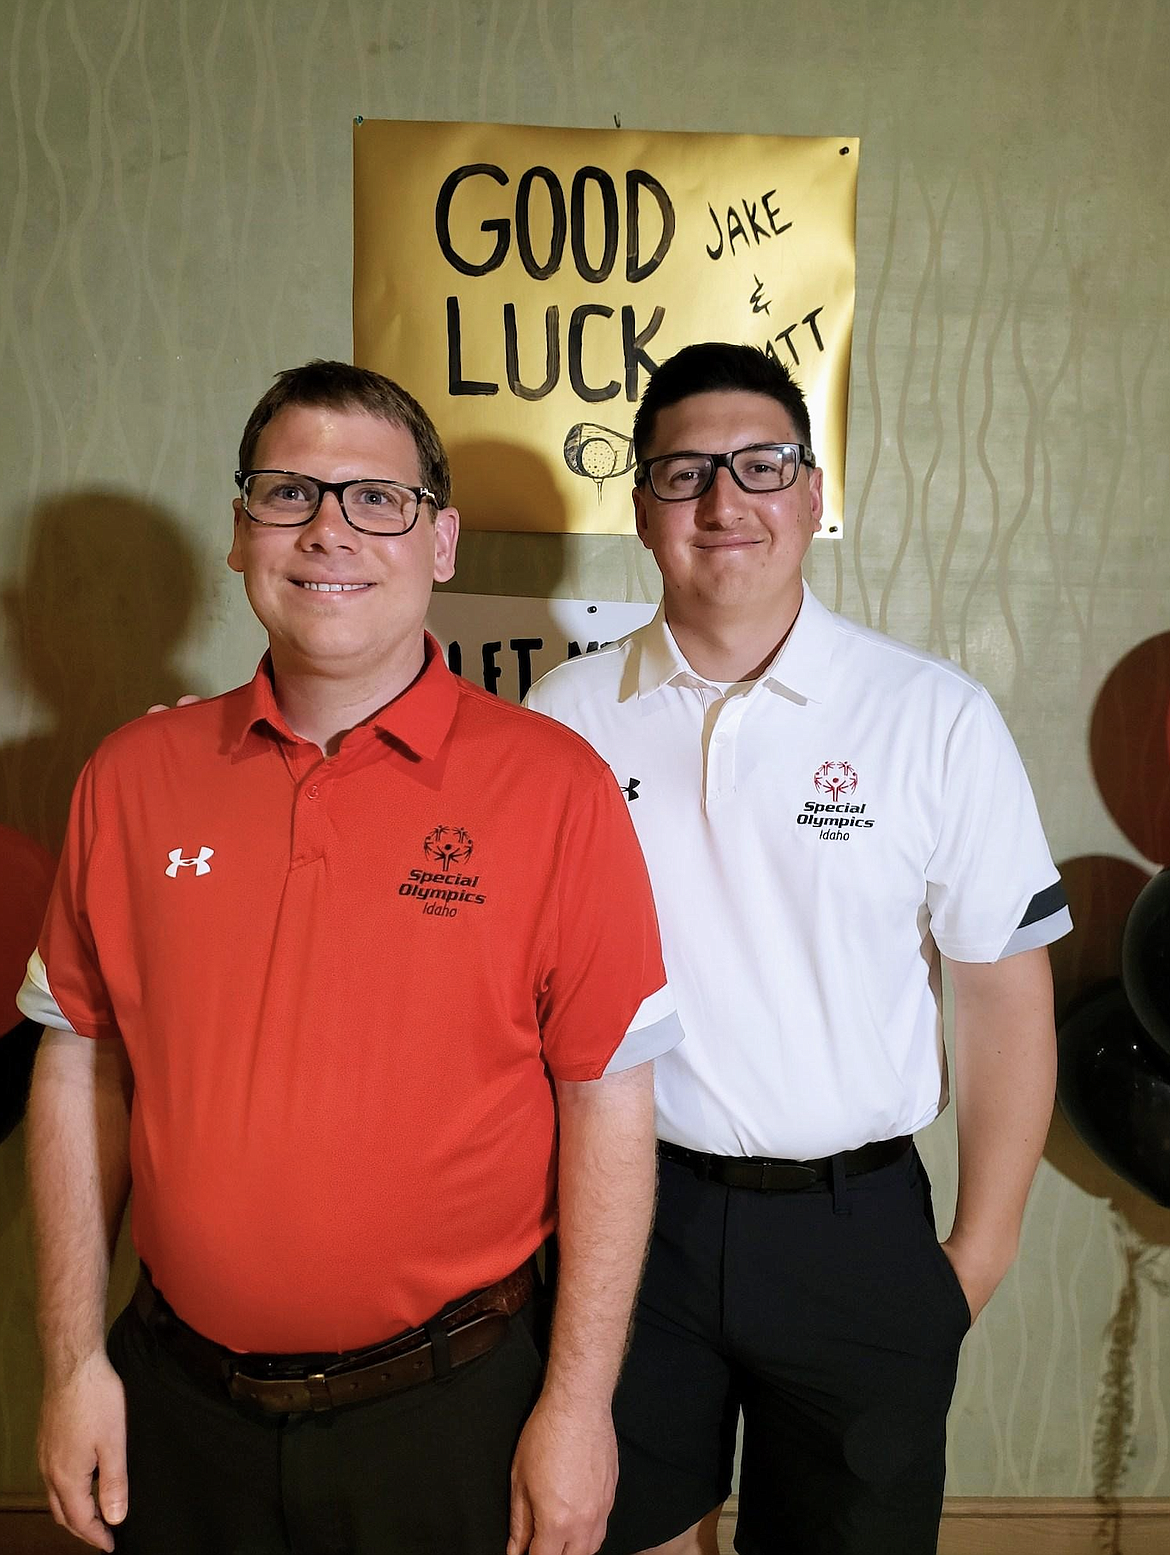 Jake Kerr and Matthew Creighton smile for the camera during their special sendoff party held at the Coeur d'Alene Resort on June 1. The duo are set to represent North Idaho at the Special Olympics USA Games in Orlando, Florida.